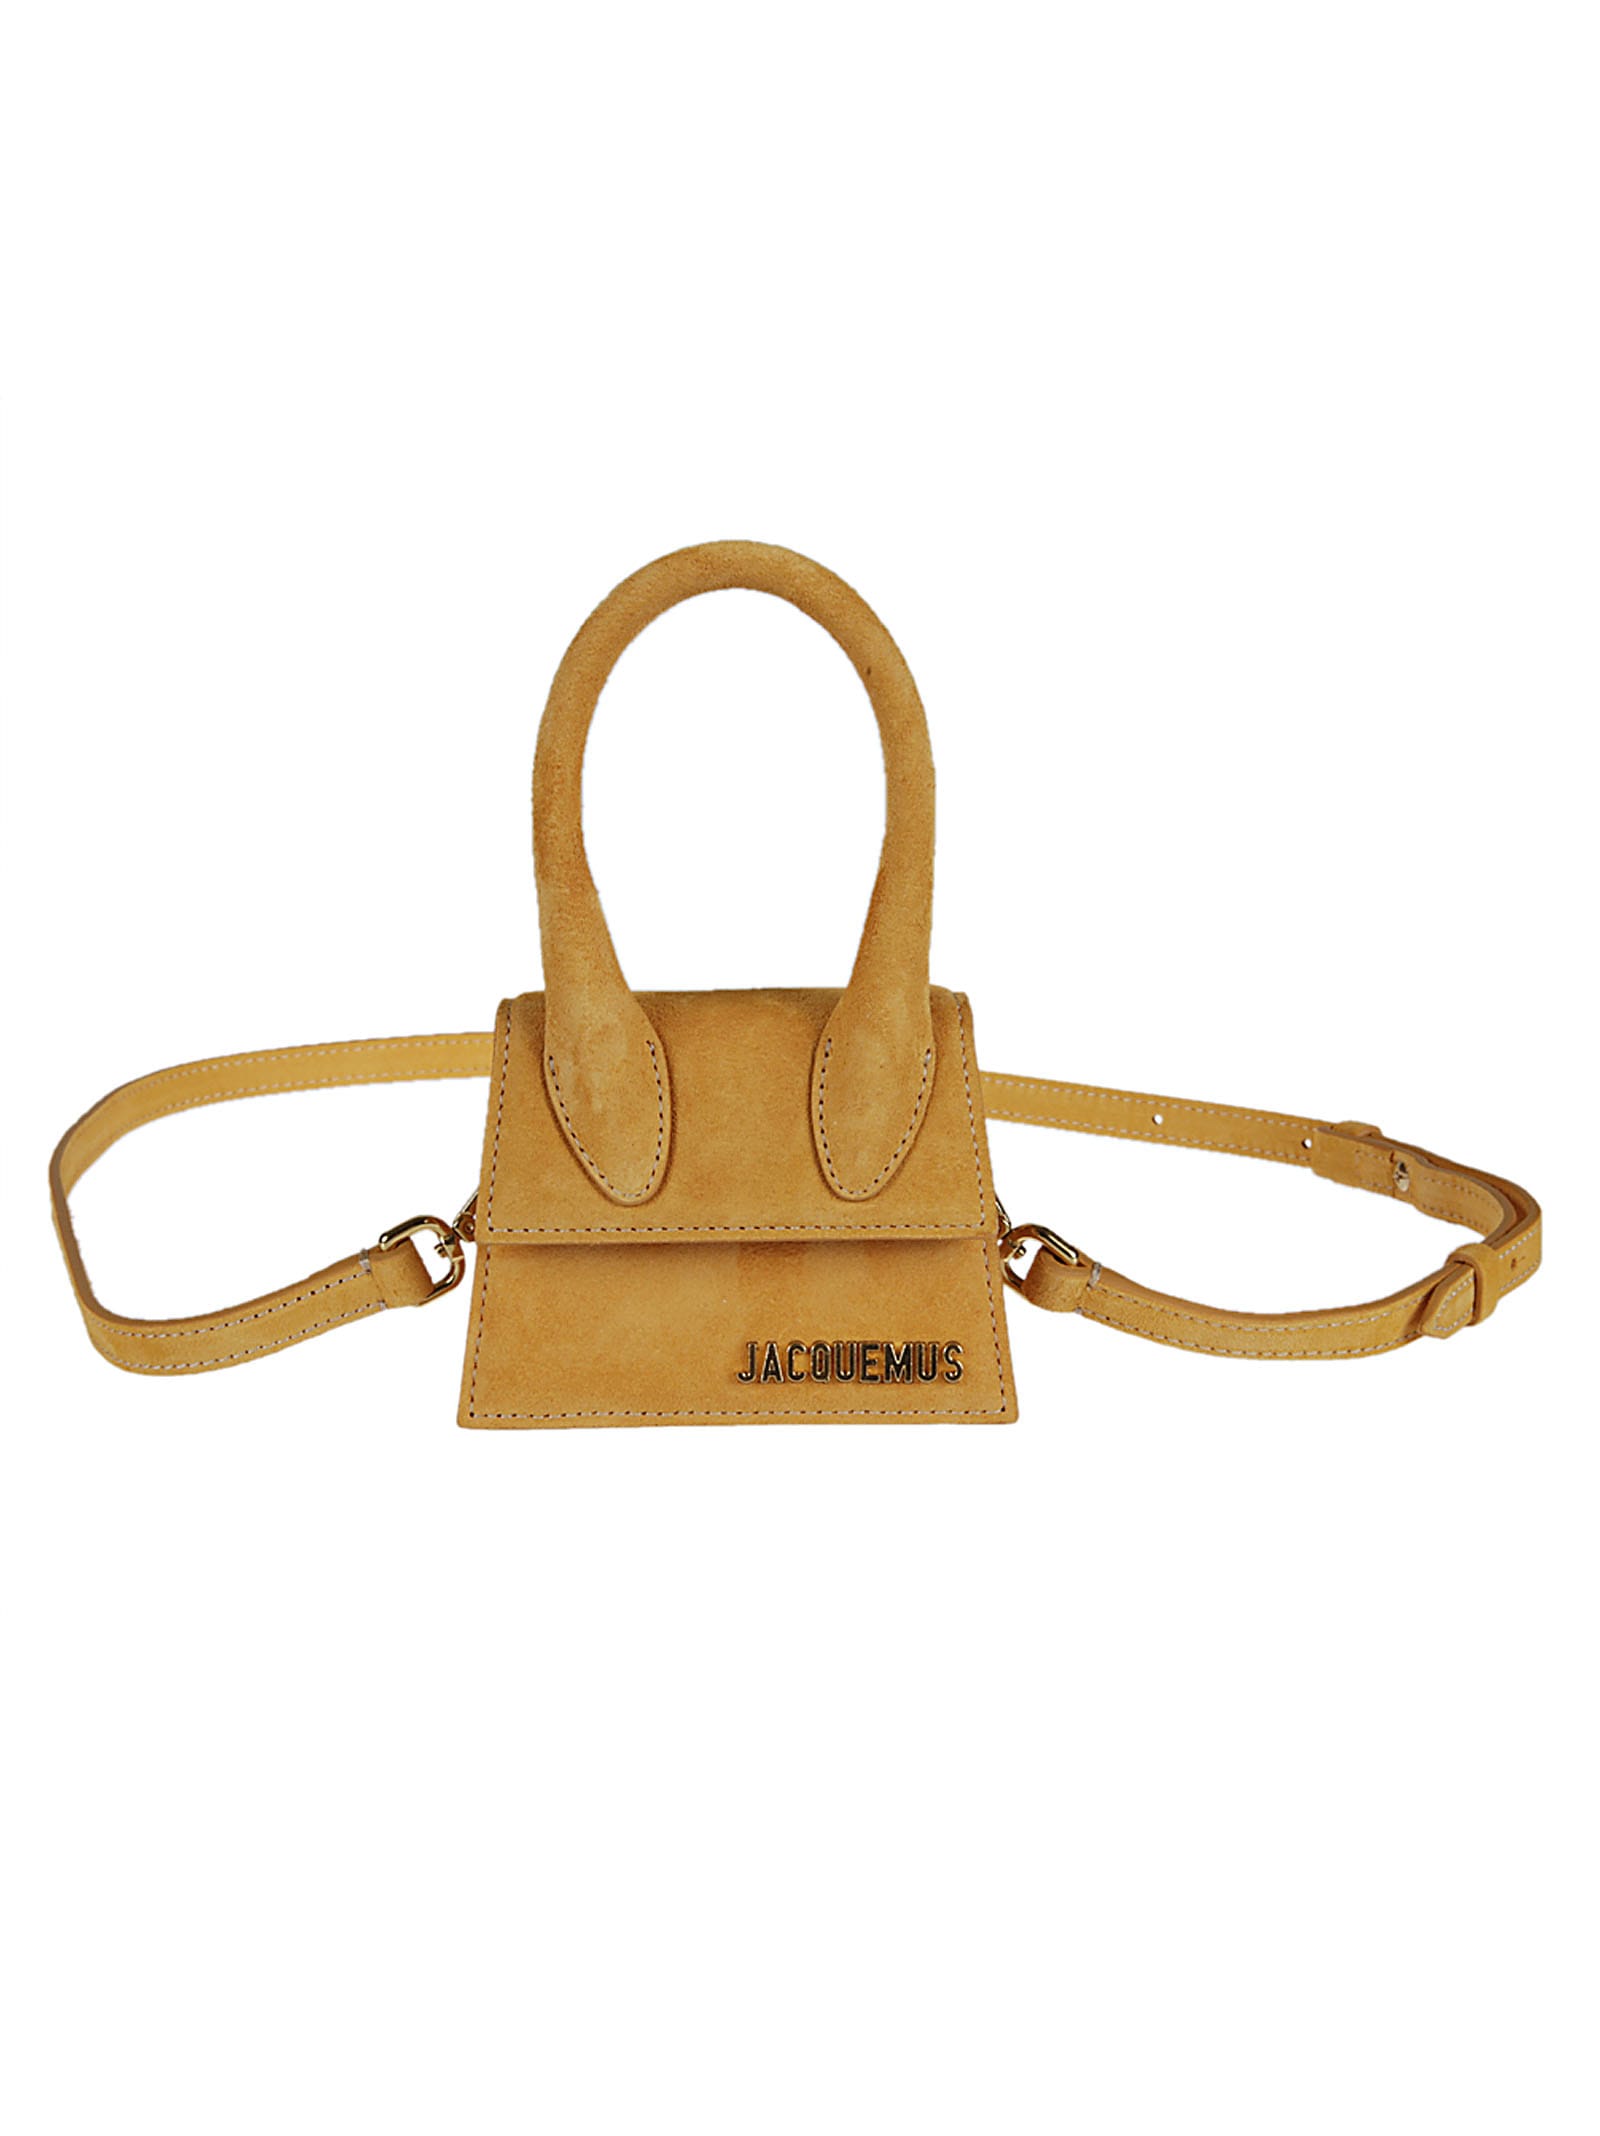 Women's JACQUEMUS Bags On Sale, Up To 70% Off | ModeSens